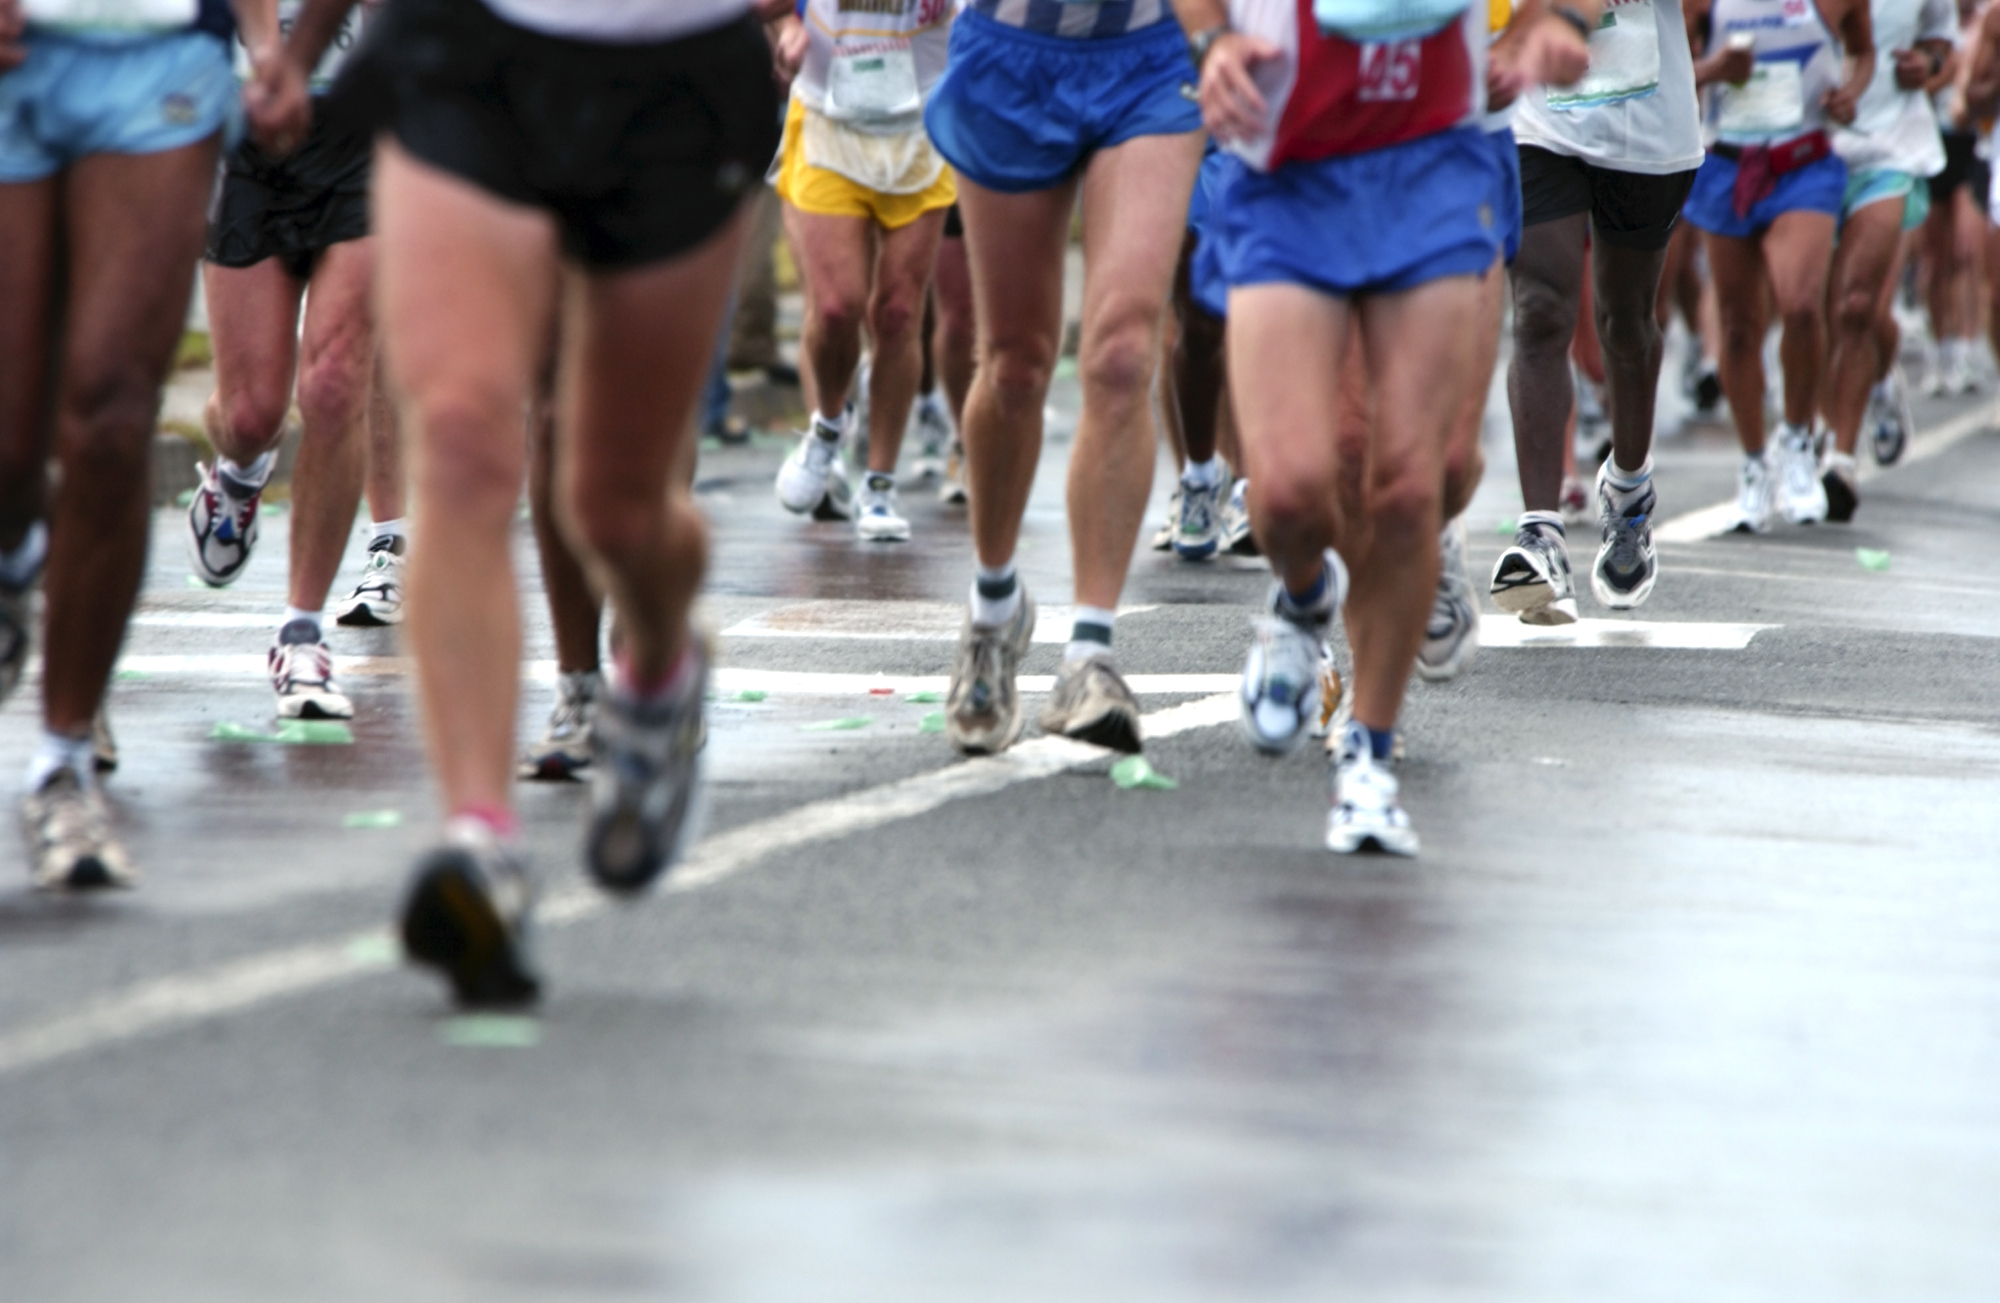 A group of marathon runners are seen running on a road. Their legs and running shoes are visible, but their upper bodies and faces are mostly out of frame